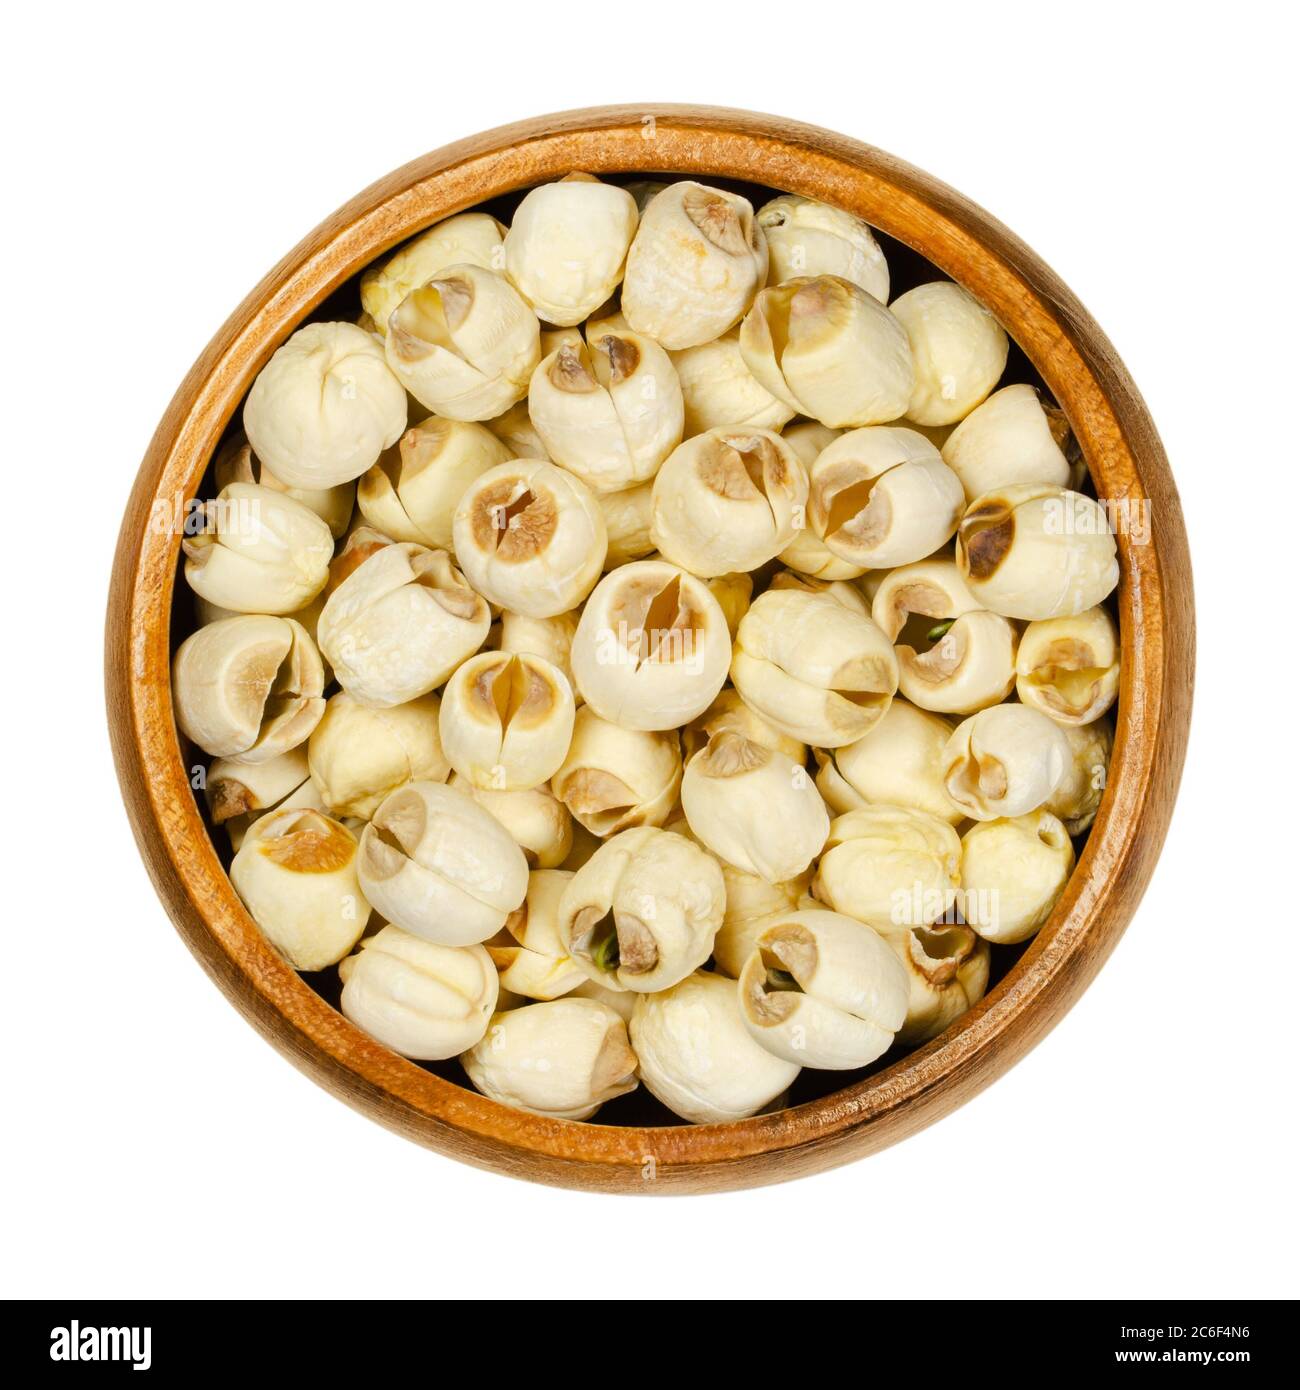 Dried shelled white lotus nuts in wooden bowl. Edible seeds of Indian lotus. Nelumbo nucifera, also known as sacred lotus, bean of India. Stock Photo